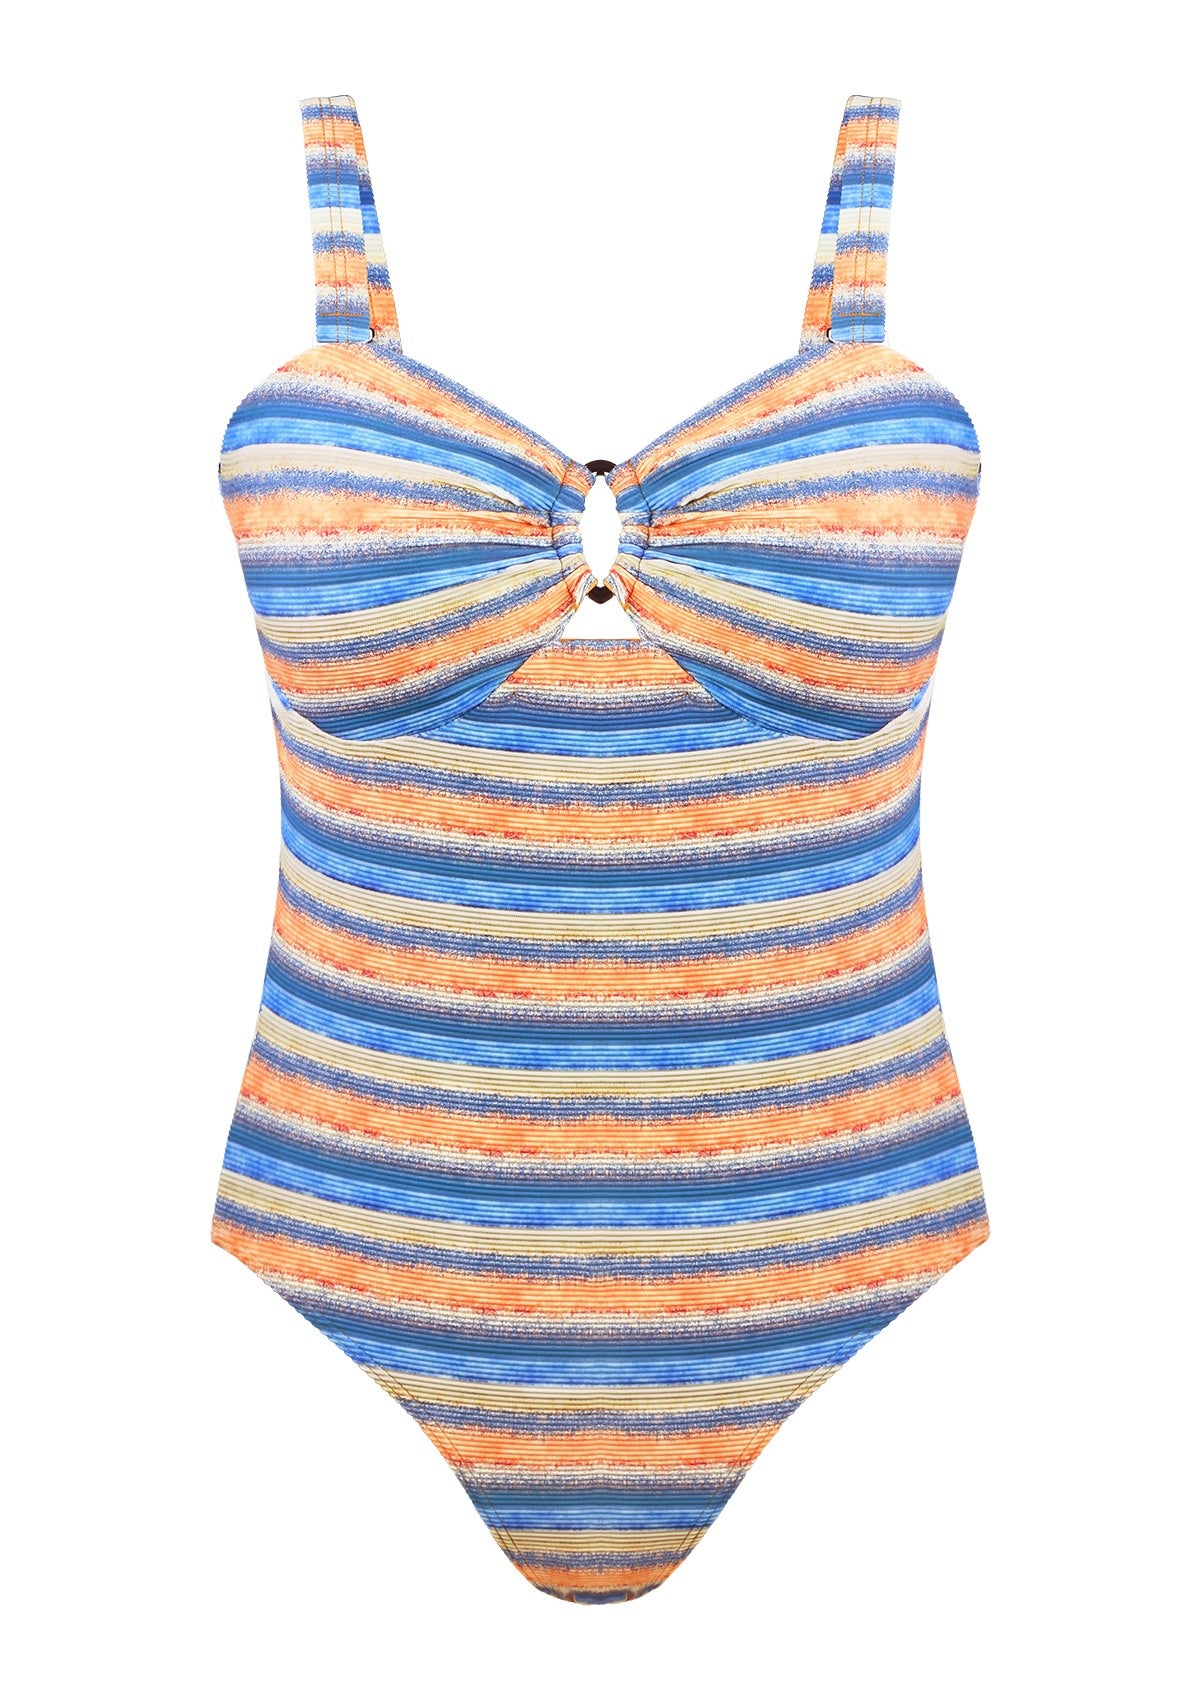 Multiway Multi-colored Striped One-piece Swimsuit - 4XL / Multi Colored Stripes